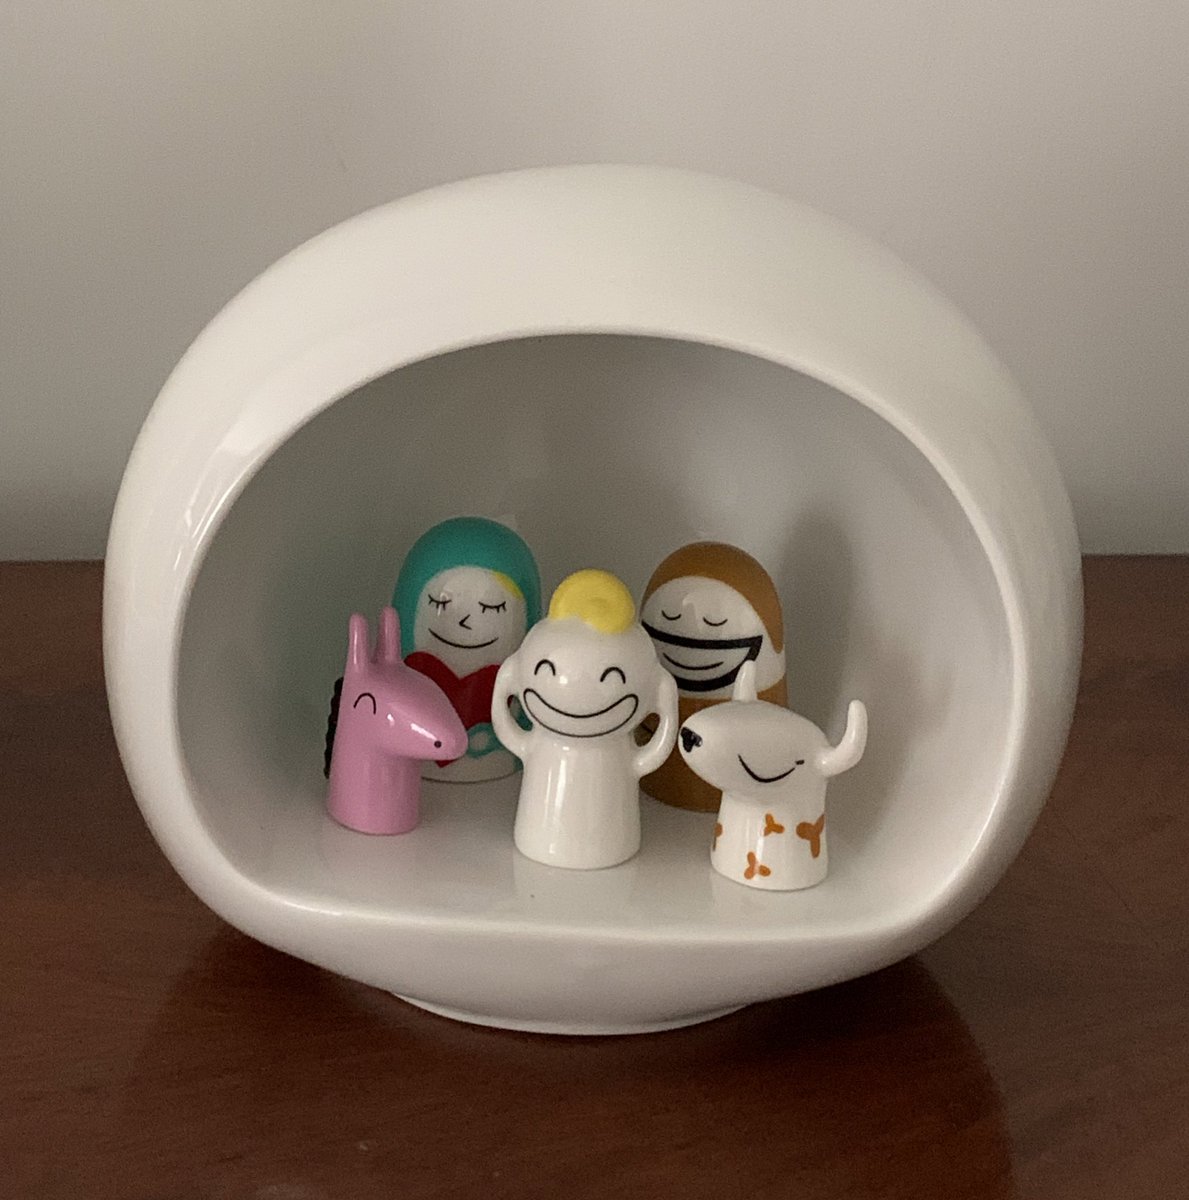 A beautiful and joyful #Nativity set by #Alessi. Hand decorated fine porcelain for this iconic #Christmas crib. Italy.
#MerryChristmas and #HappyMothersDay 

#CatholicX #presepe #design #miniature #collectibles #catholicTwitter #pesebres #holyfamily #Xmas #Natale